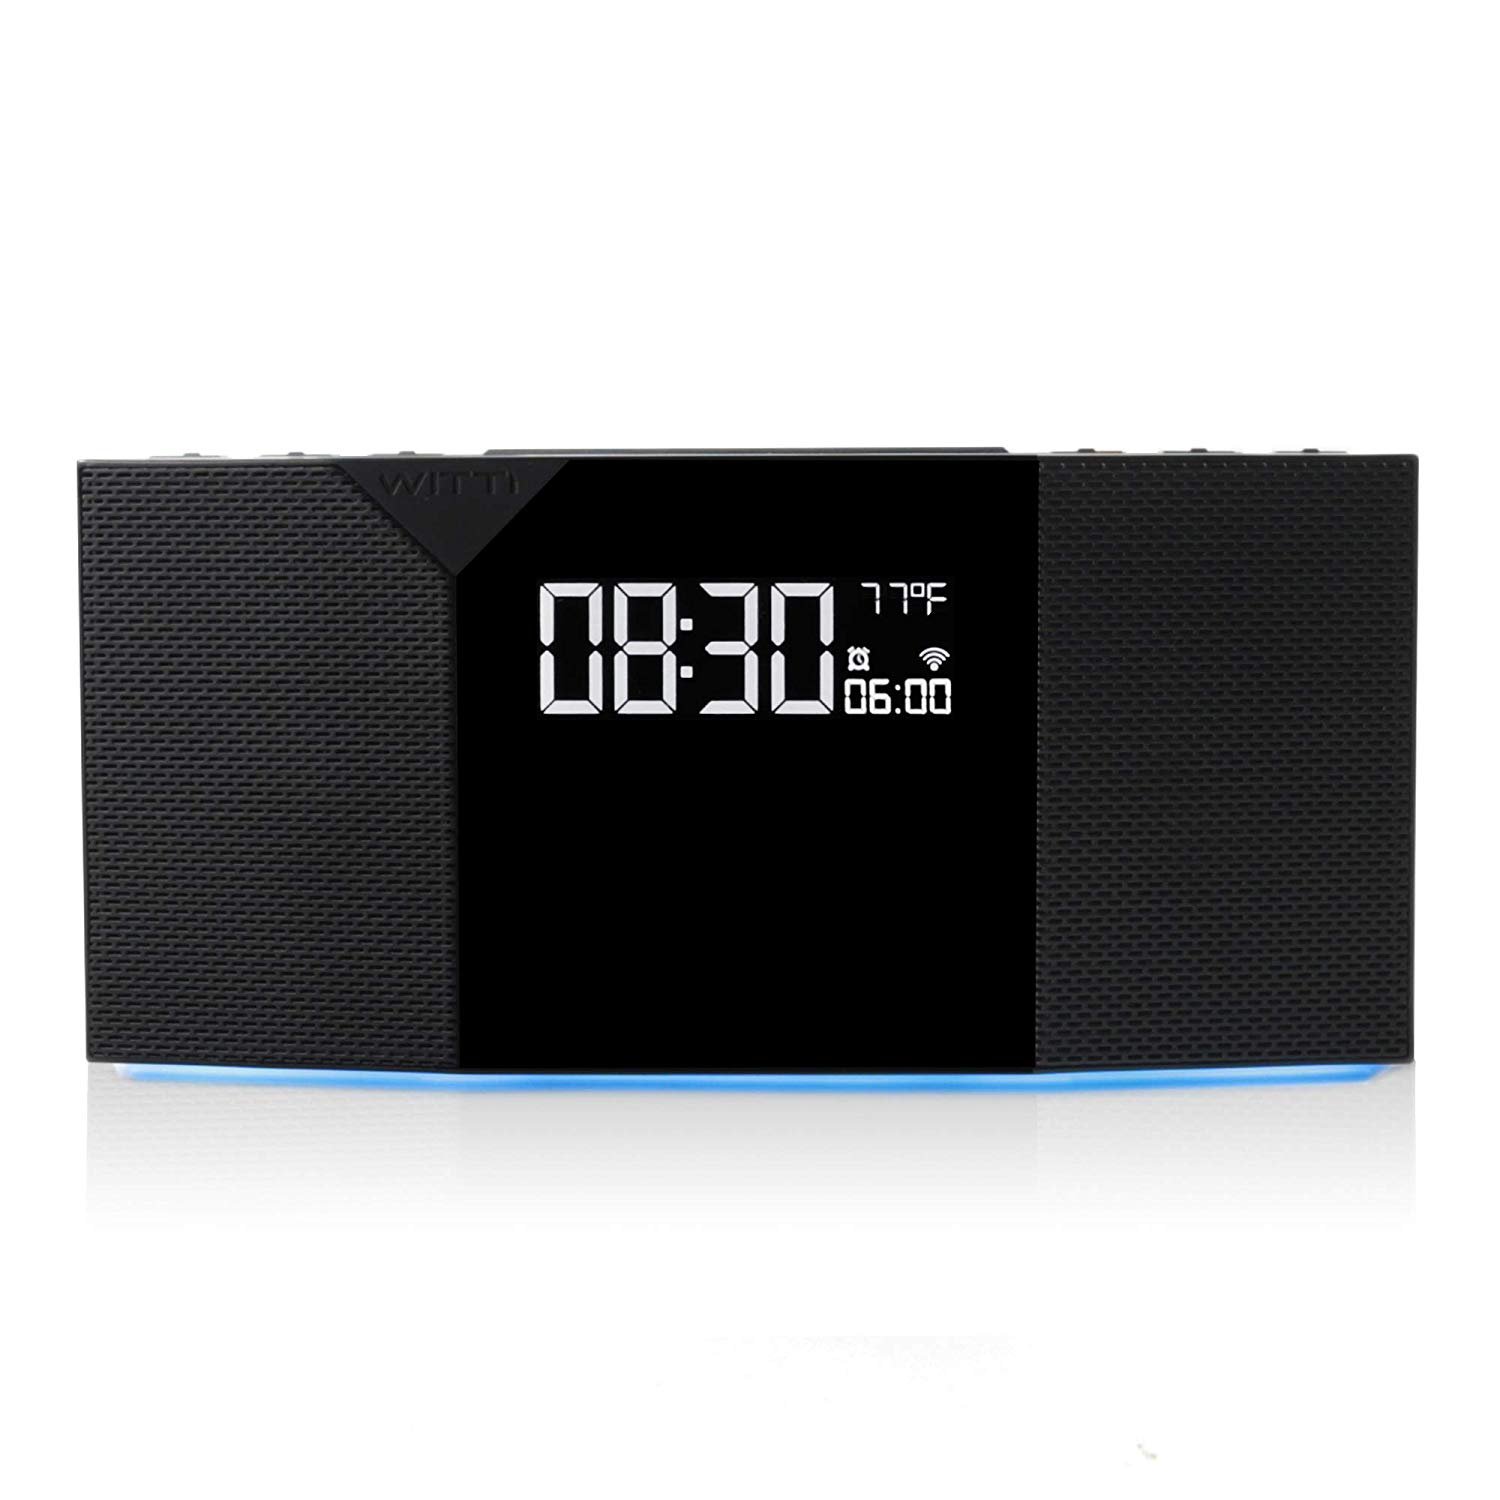 WITTI BEDDI Glow SE | App Enabled Intelligent Alarm Clock with Wake-up Light, Bluetooth Speaker and USB Charging Station 1